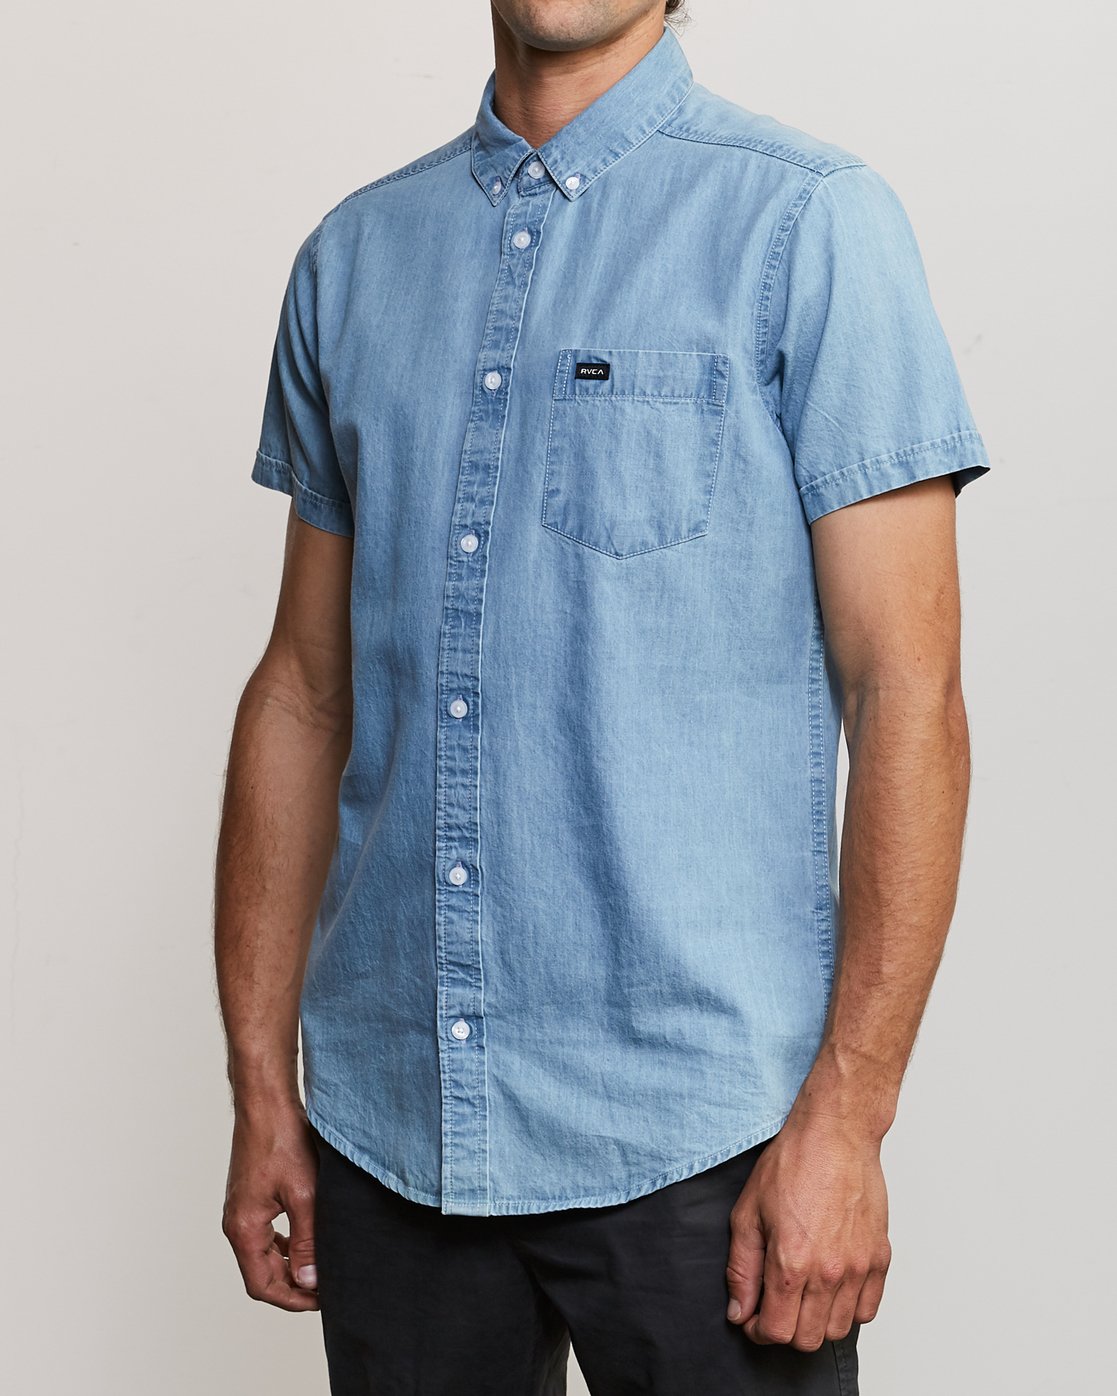 DEAD FLAG WASHED BUTTON-UP SHIRT